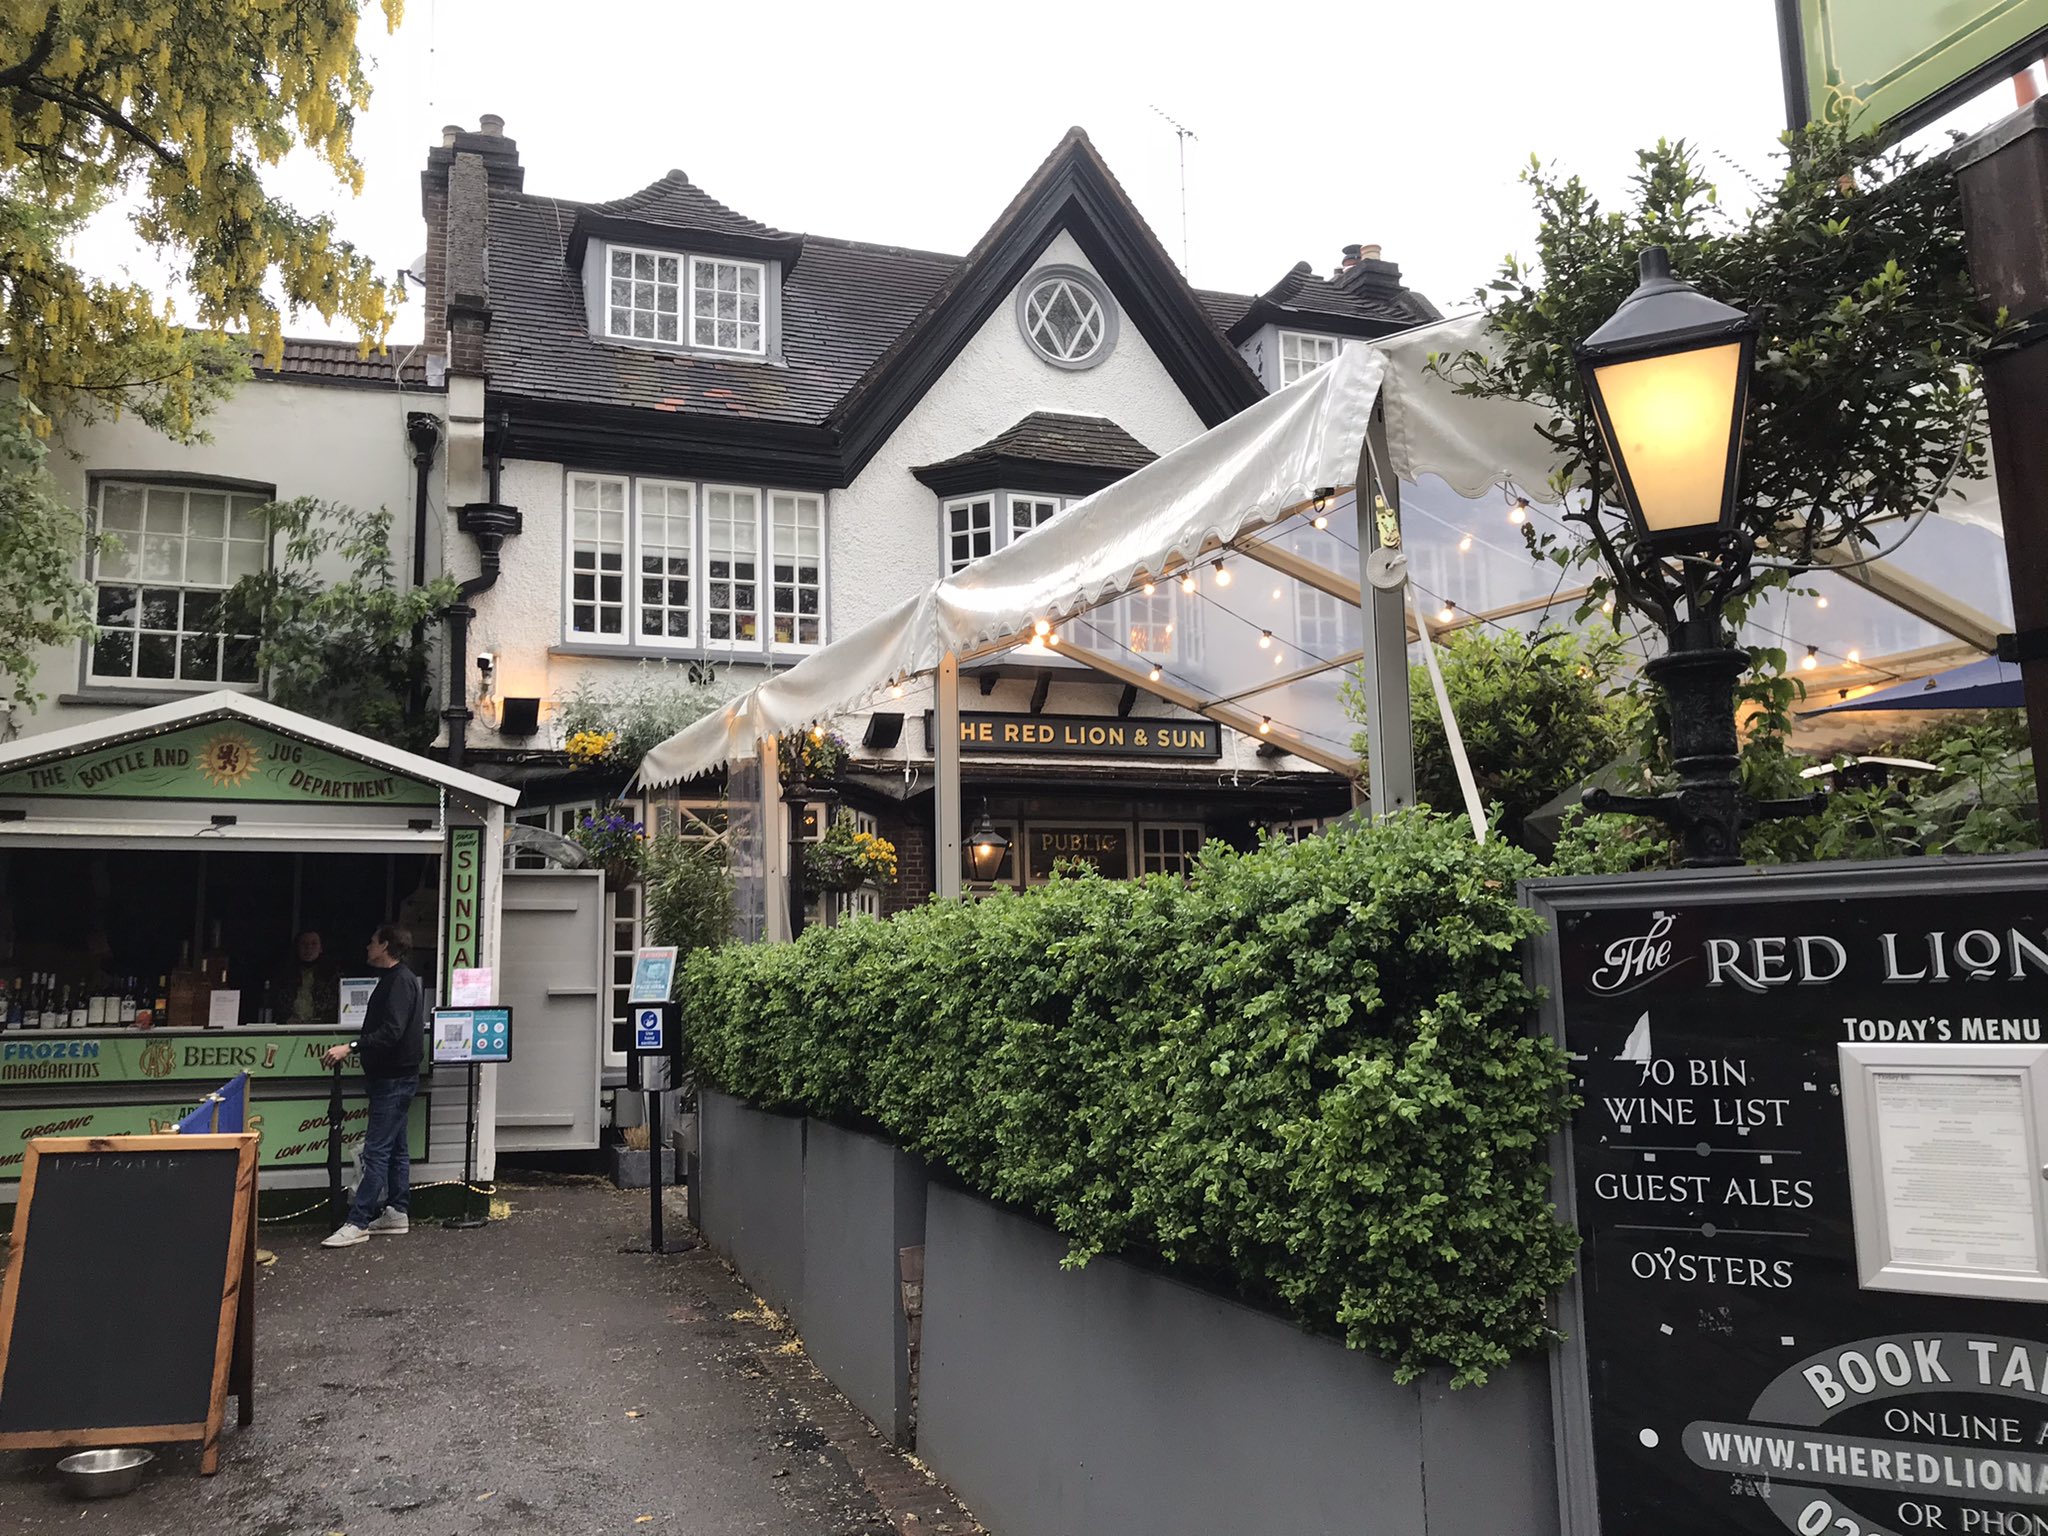 Saving London on Twitter: "The Red Lion &amp; Sun has two beer gardens. Locally sourced food where possible. Highgate so many good pubs you will be spoilt for choice! Book